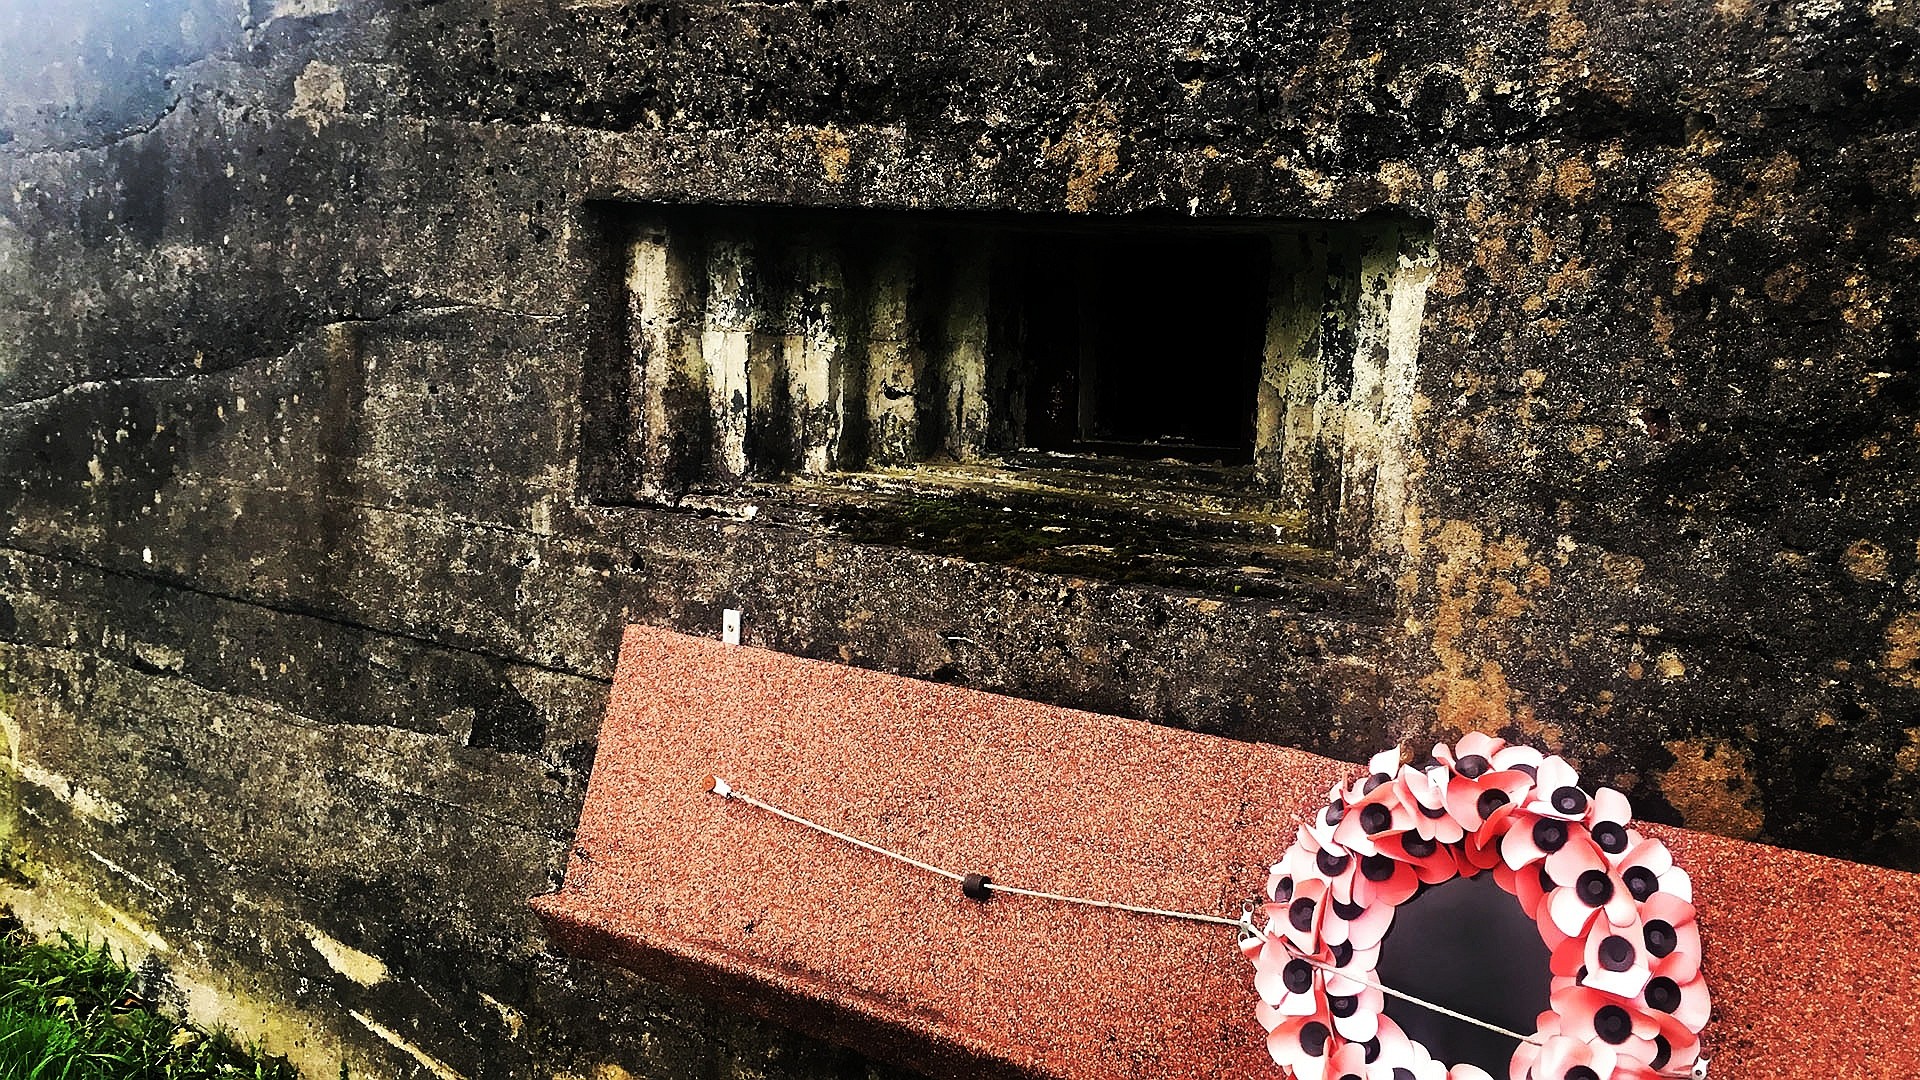 Staircasing on the machine gun loop of the preserved Second World War era pillbox at Annagh Meadows, Portadown, Co. Armagh.